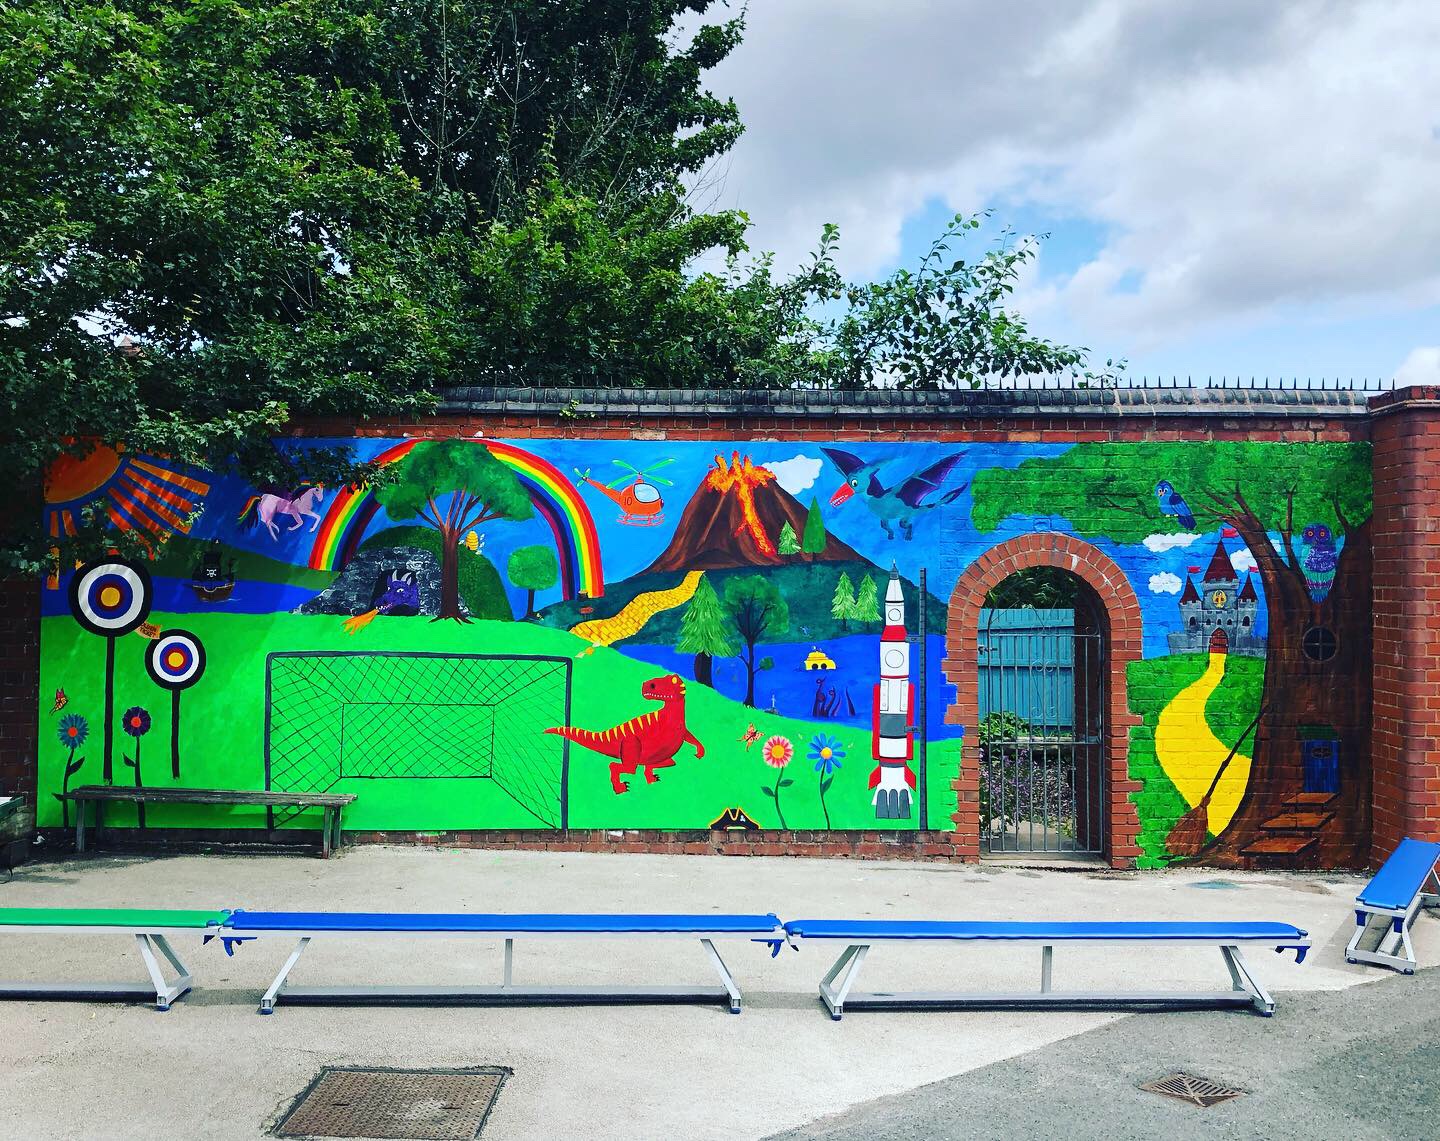 The finished Story Time Mural at Harborne Primary School